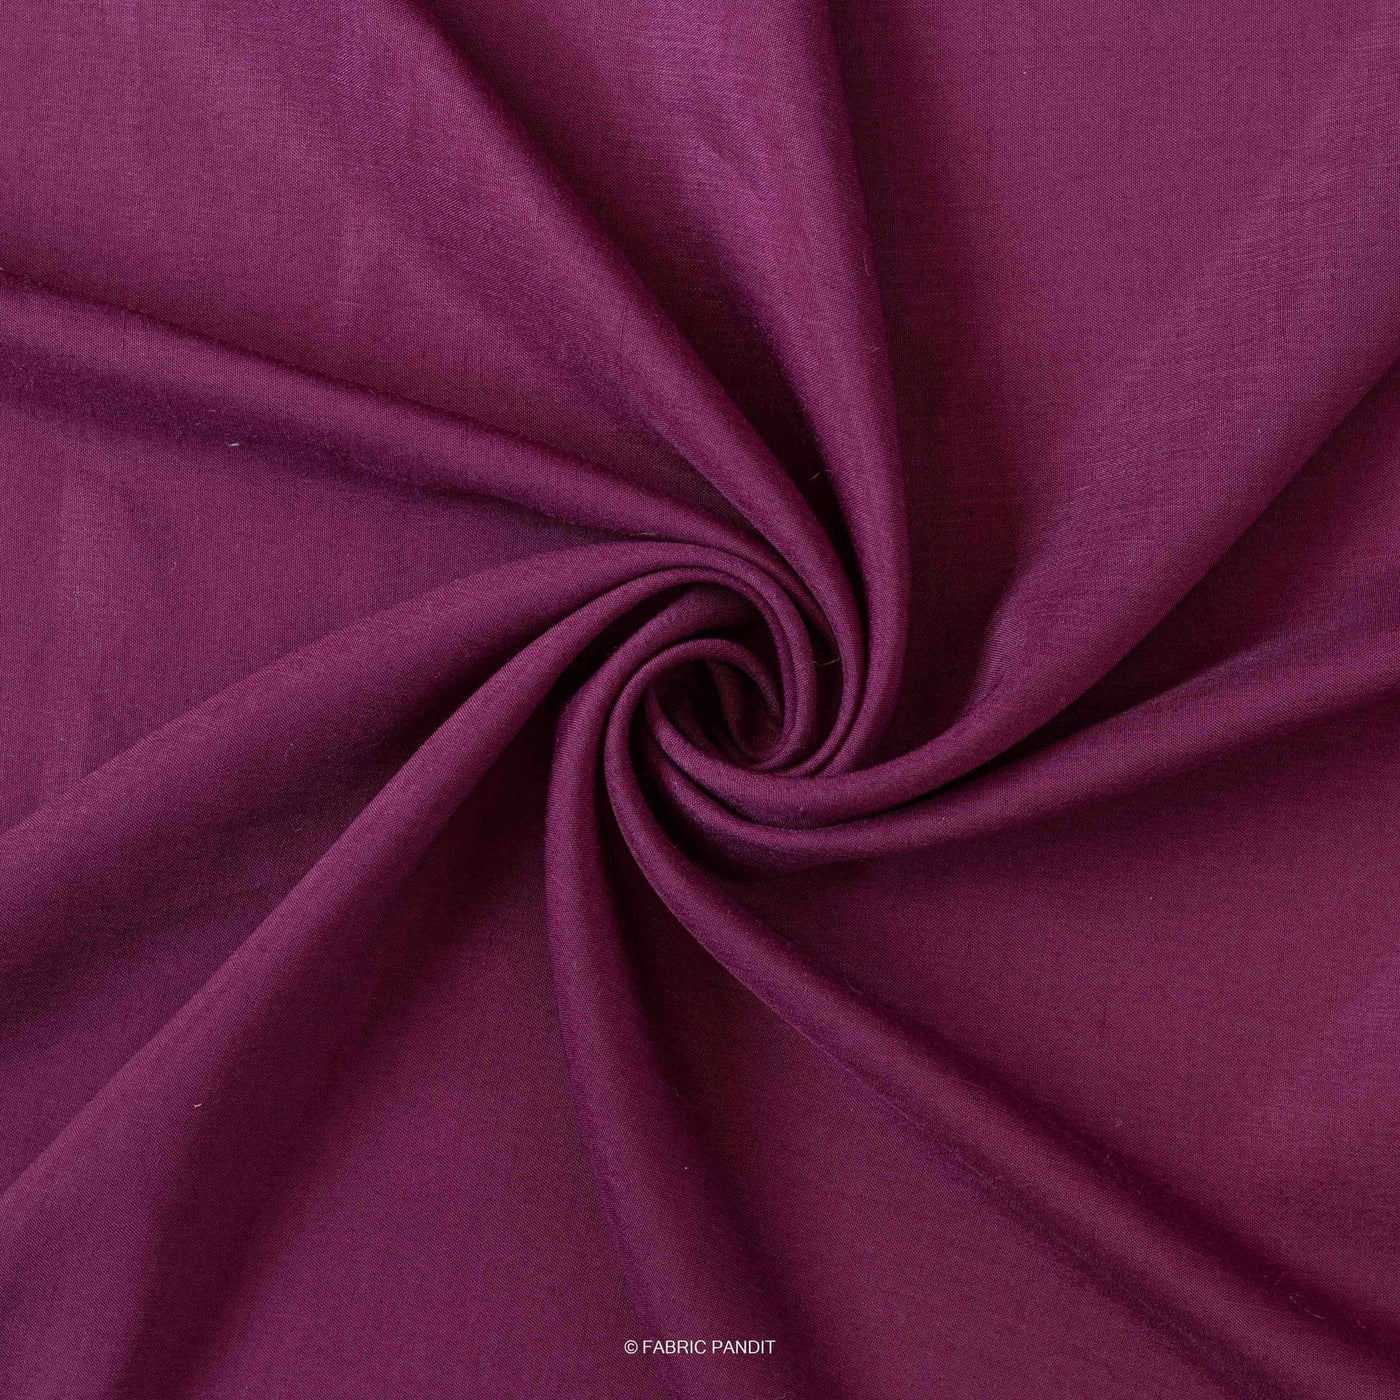 Fabric Pandit Fabric Violet Wine Plain Soft Poly Muslin Fabric (Width 44 Inches)